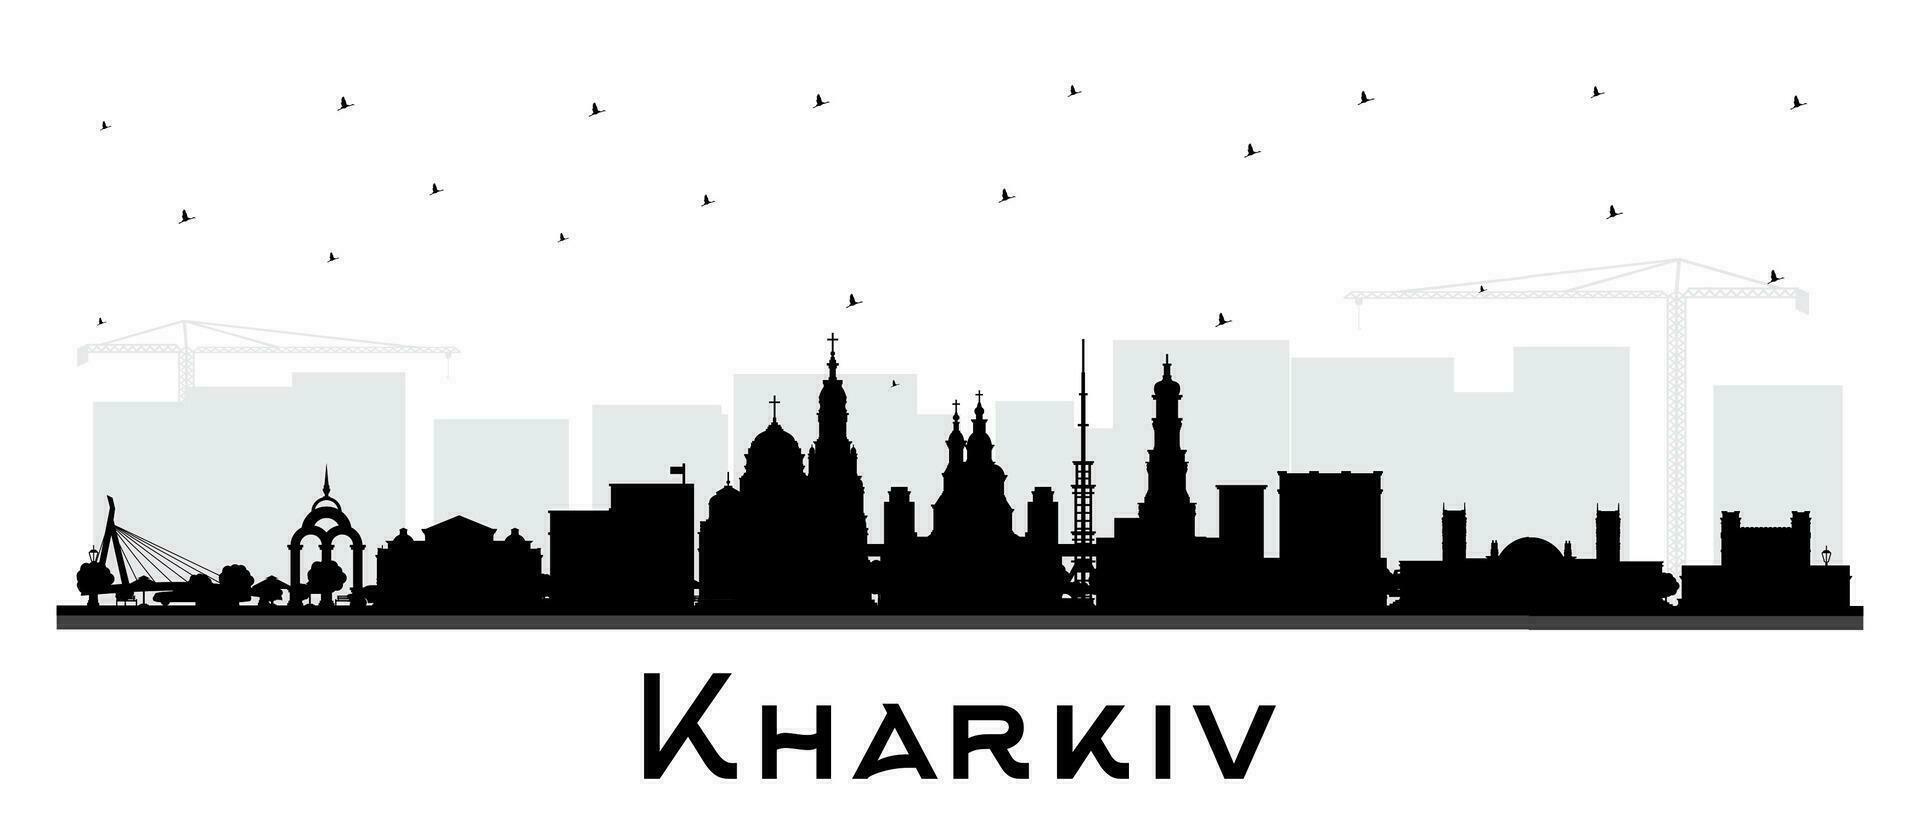 Kharkiv Ukraine City Skyline silhouette with black Buildings isolated on white. Kharkiv Cityscape with Landmarks. Business Travel and Tourism Concept with Historic Architecture. vector